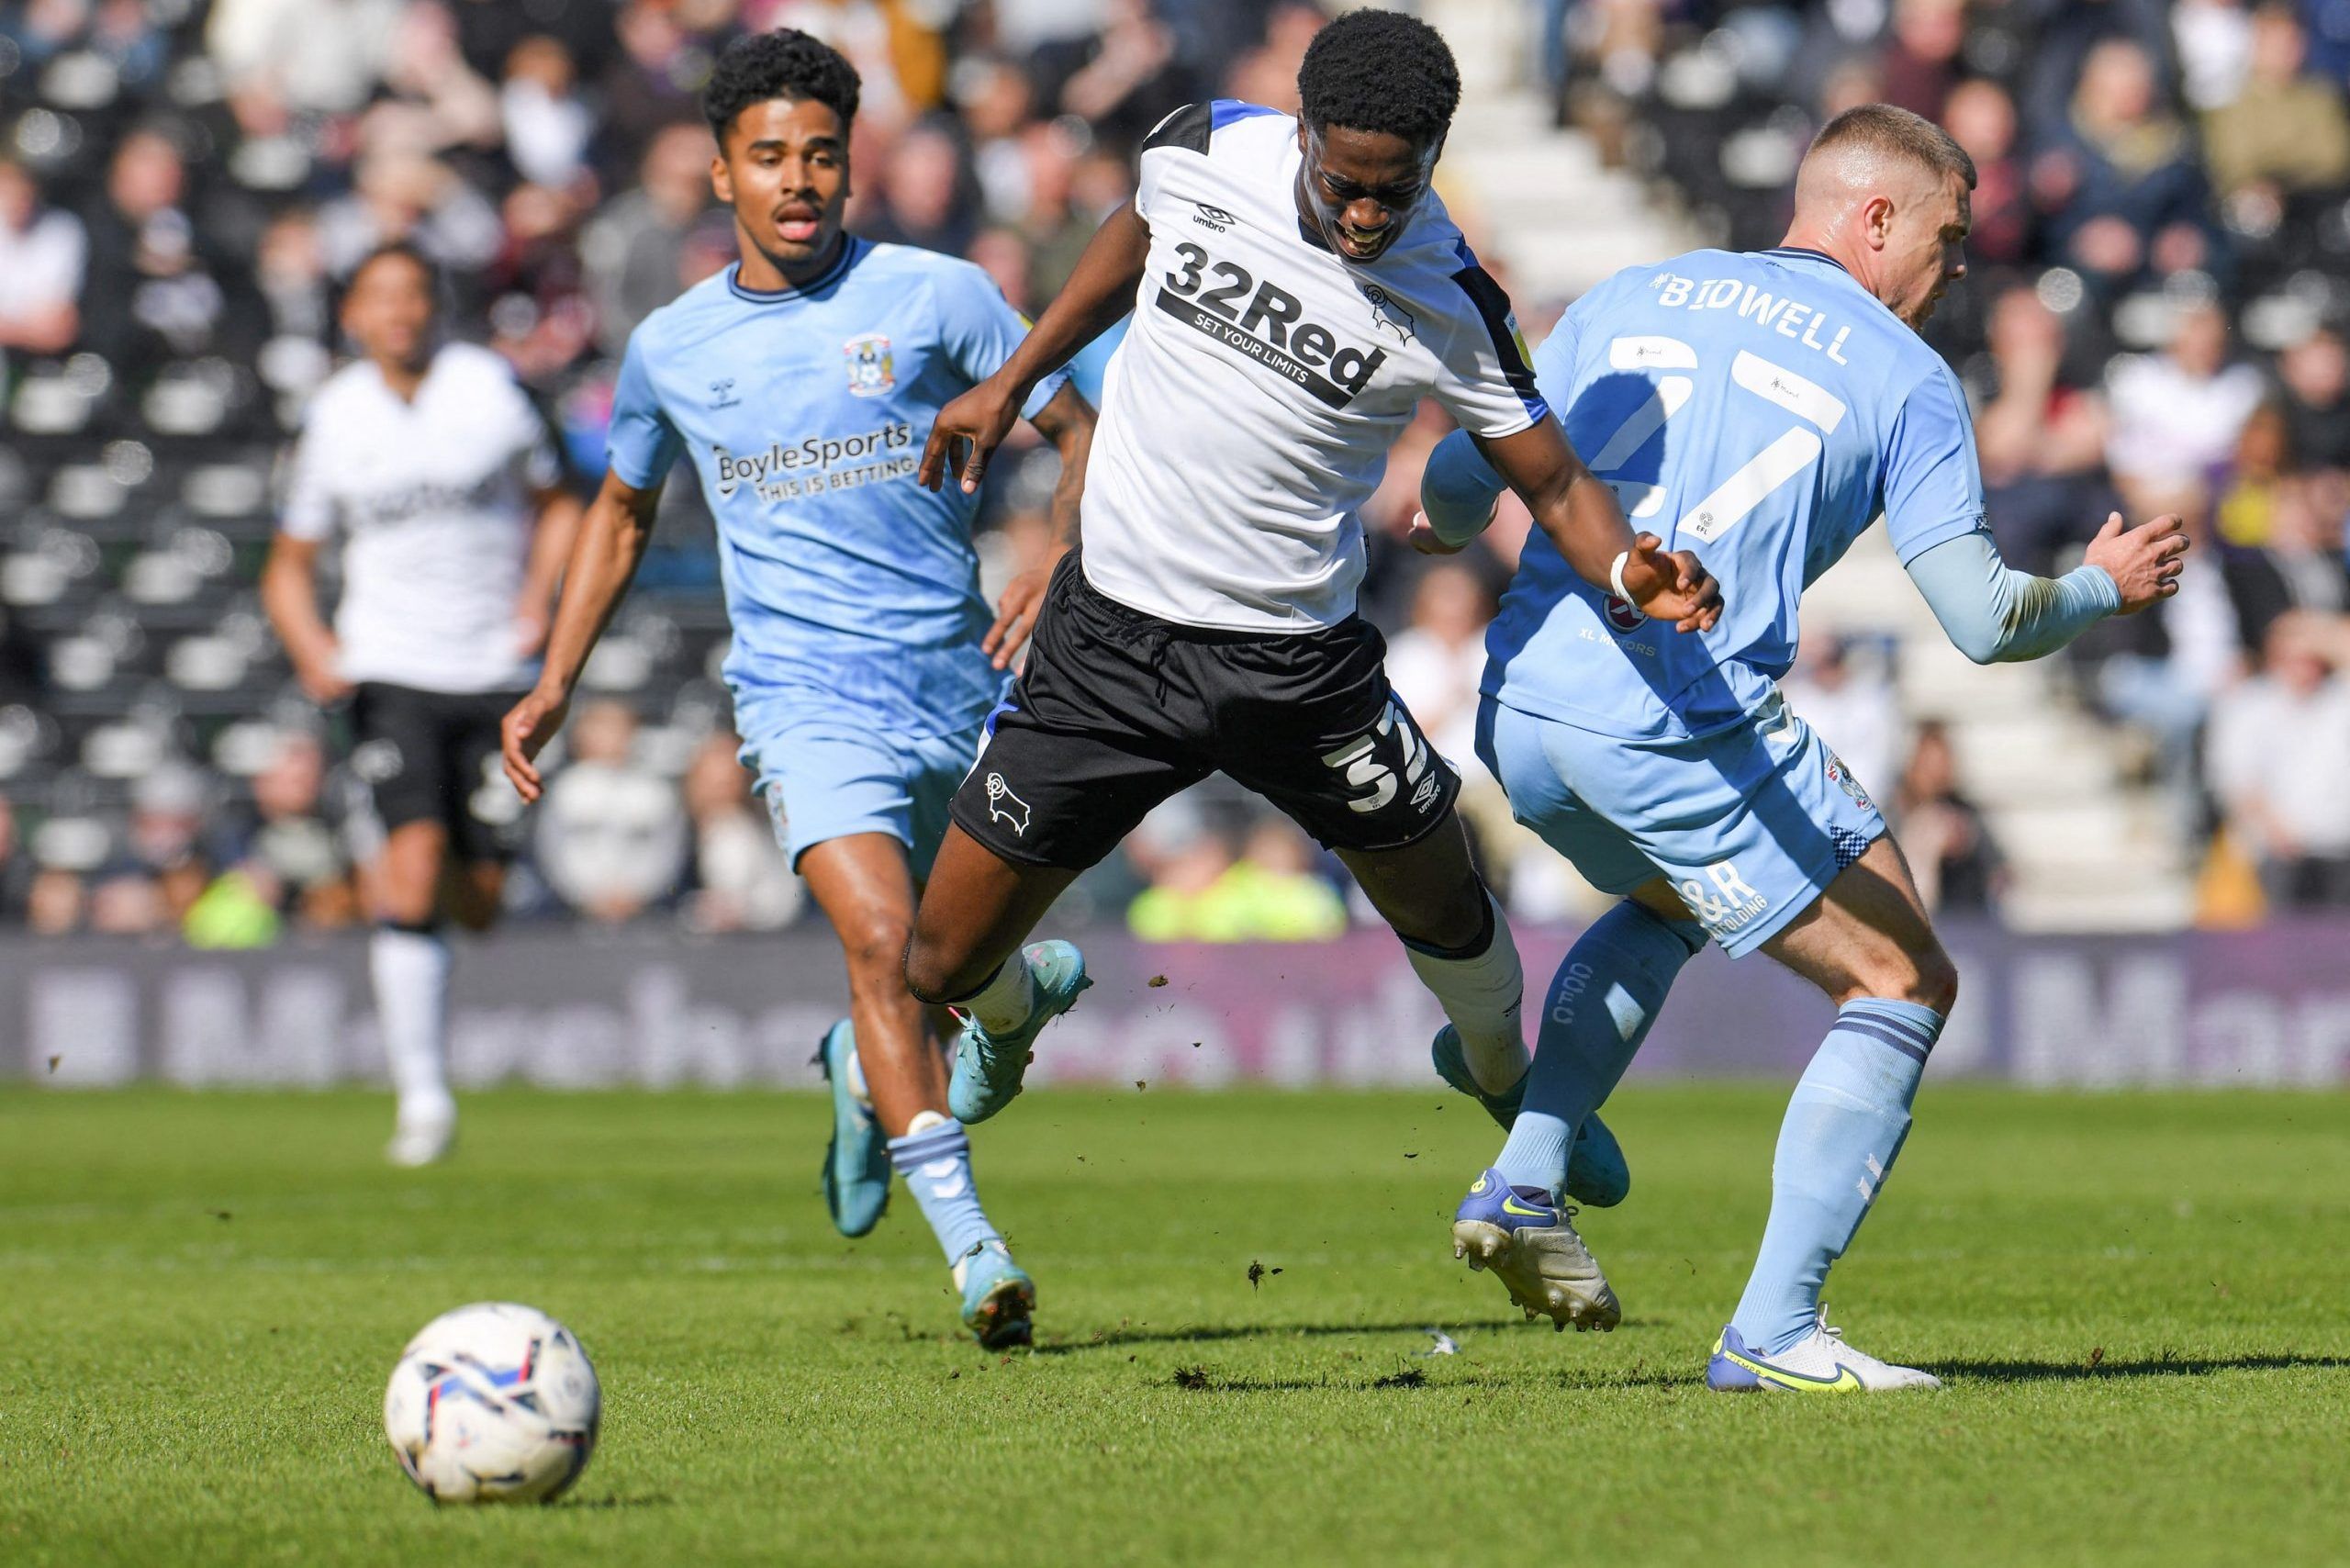 malcolm-ebiowei-tottenham-hotspur-transfer-focus-premier-league-crystal-palace-patrick-vieira-doucoure-transfer-news-aina-transfer-latestSoccer Football - Championship - Derby County v Coventry City - Pride Park, Derby, Britain - March 19, 2022 Derby County's Malcolm Ebiowei in action with Coventry City's Jake Bidwell Action Images/Paul Burrows  EDITORIAL USE ONLY. No use with unauthorized audio, video, data, fixture lists, club/league logos or 